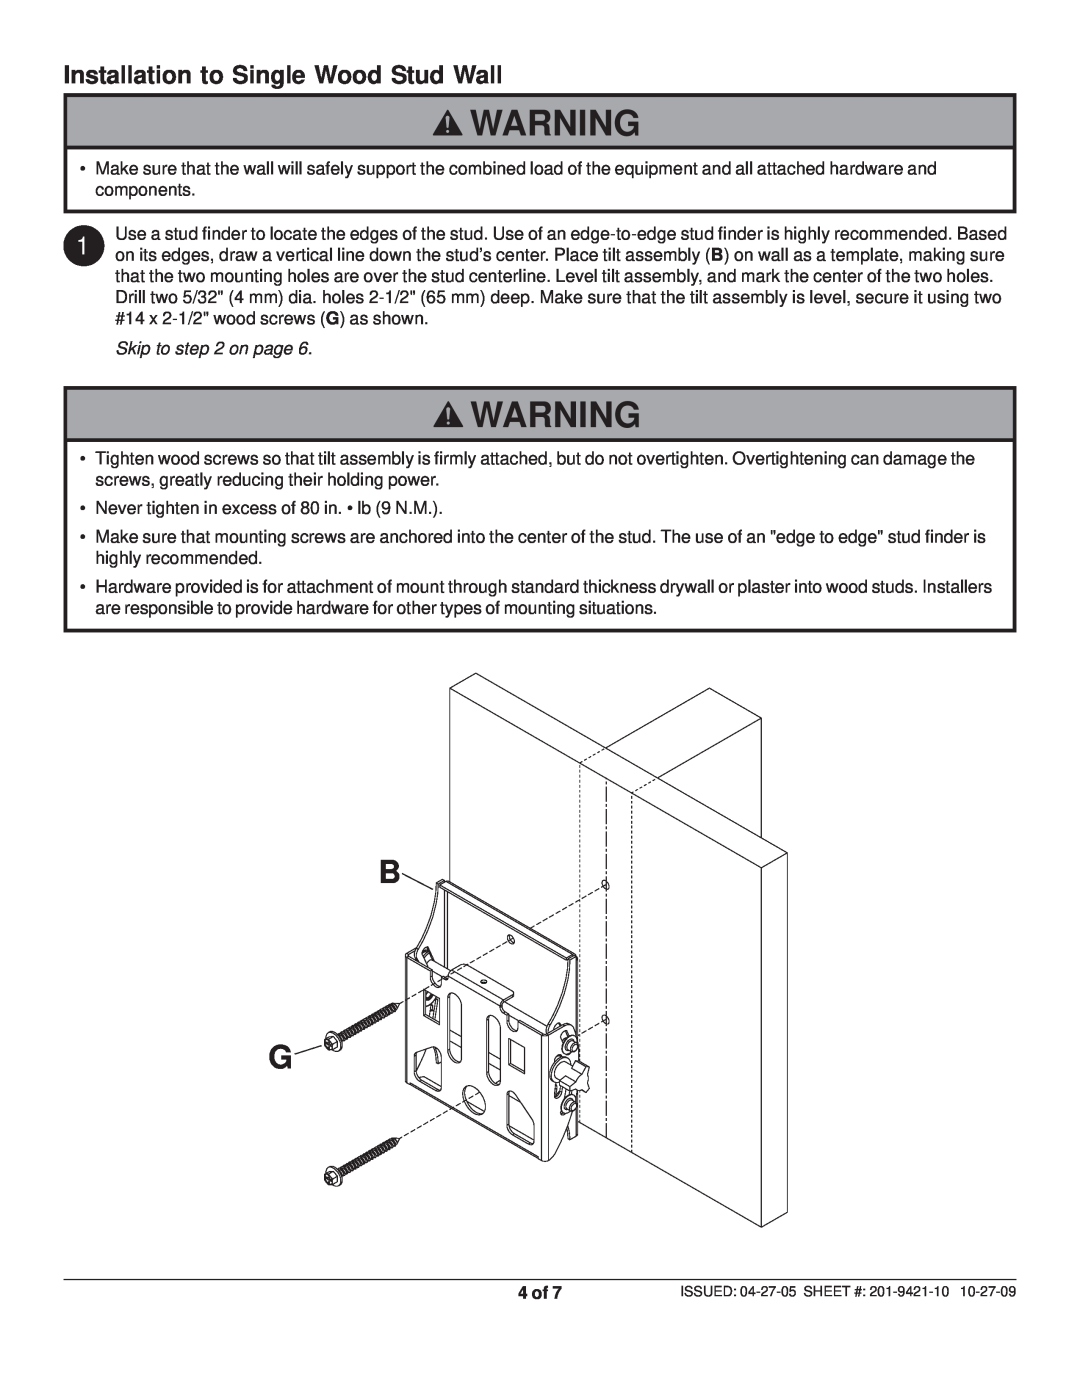 Peerless Industries ST 630-S, ST630P-S, 201-9421-10 manual Installation to Single Wood Stud Wall, Skip to on page, 4 of 